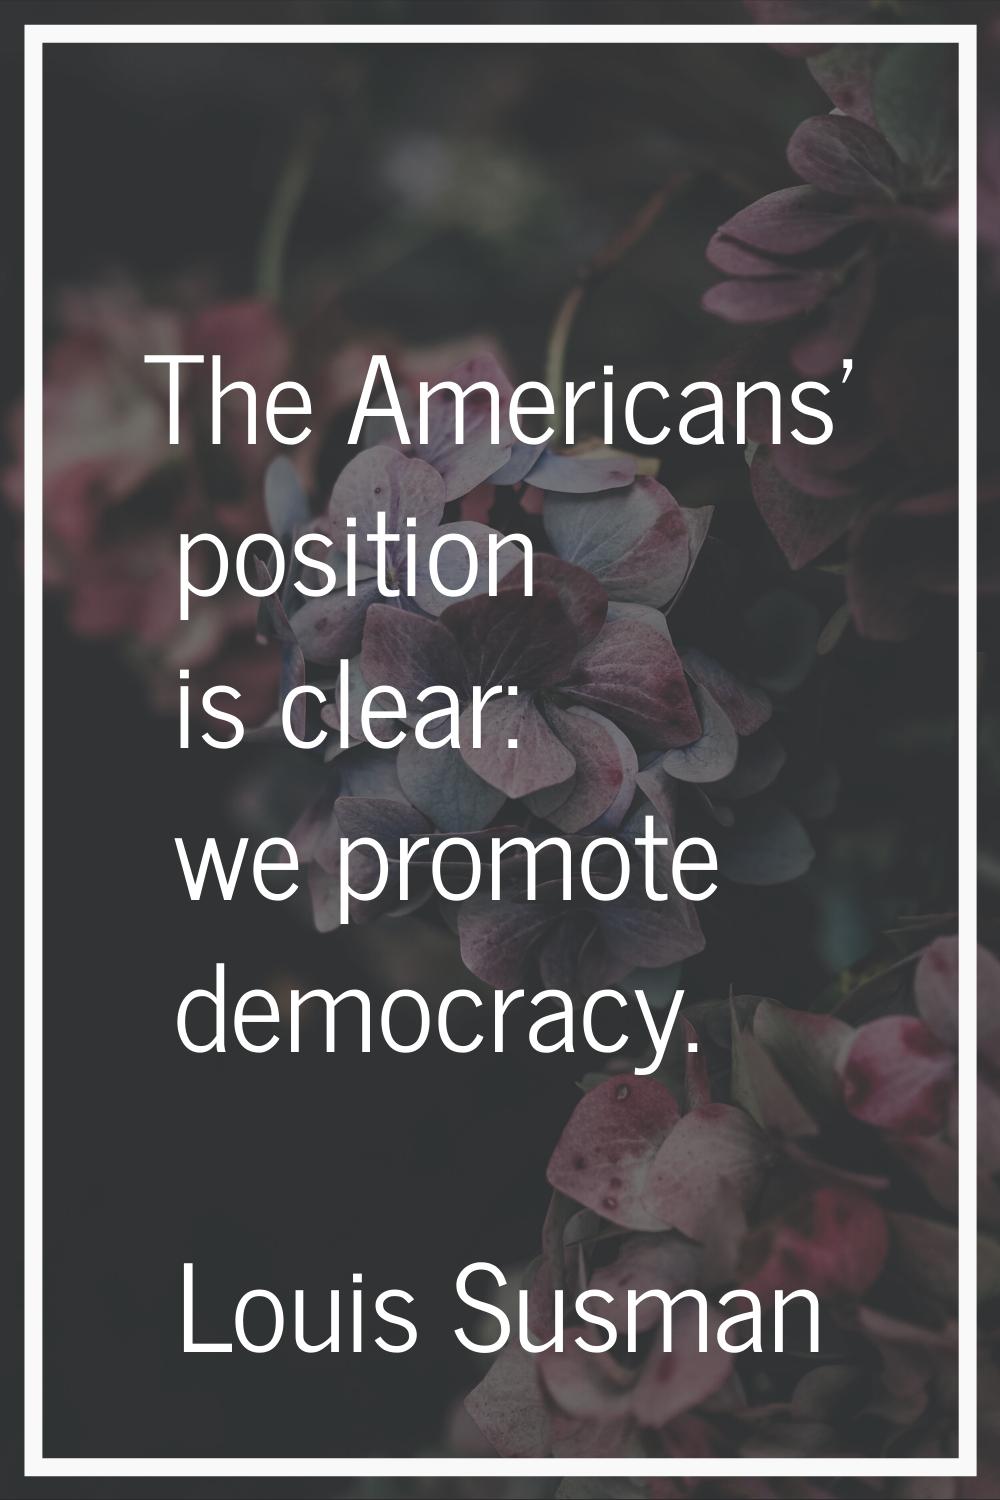 The Americans' position is clear: we promote democracy.